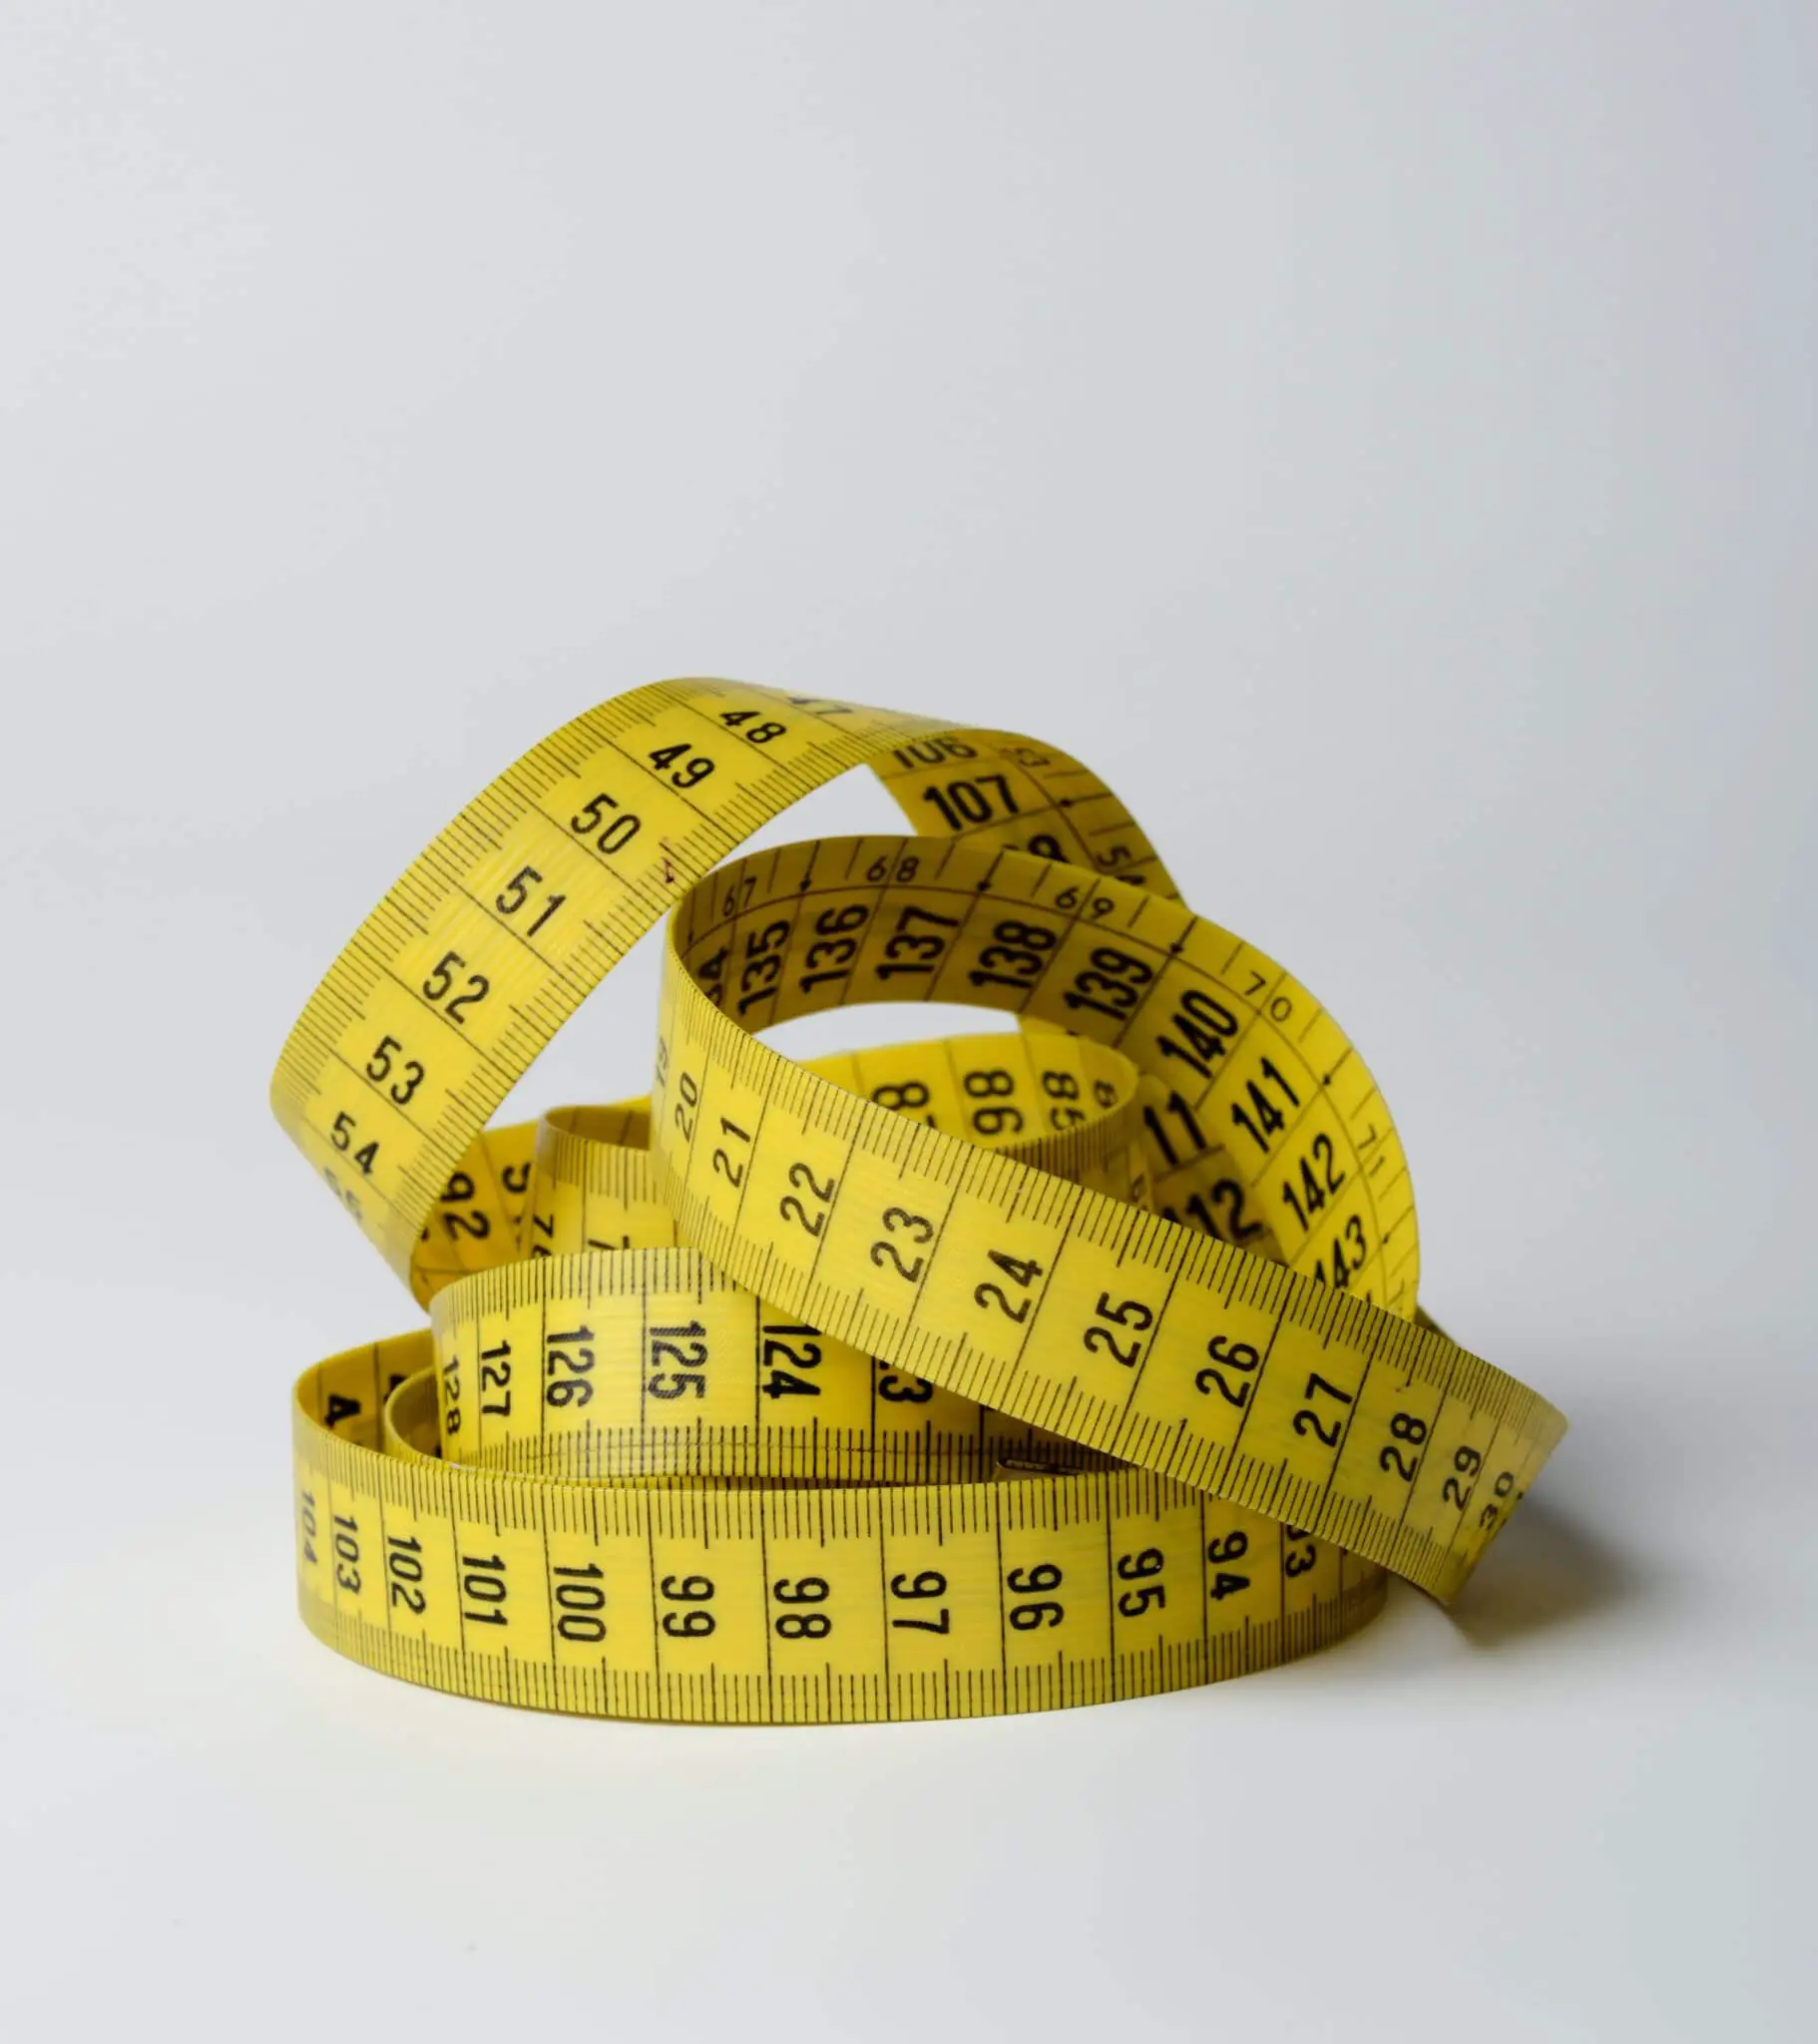 How To Read A Tape Measure- 2 Brilliant Ways